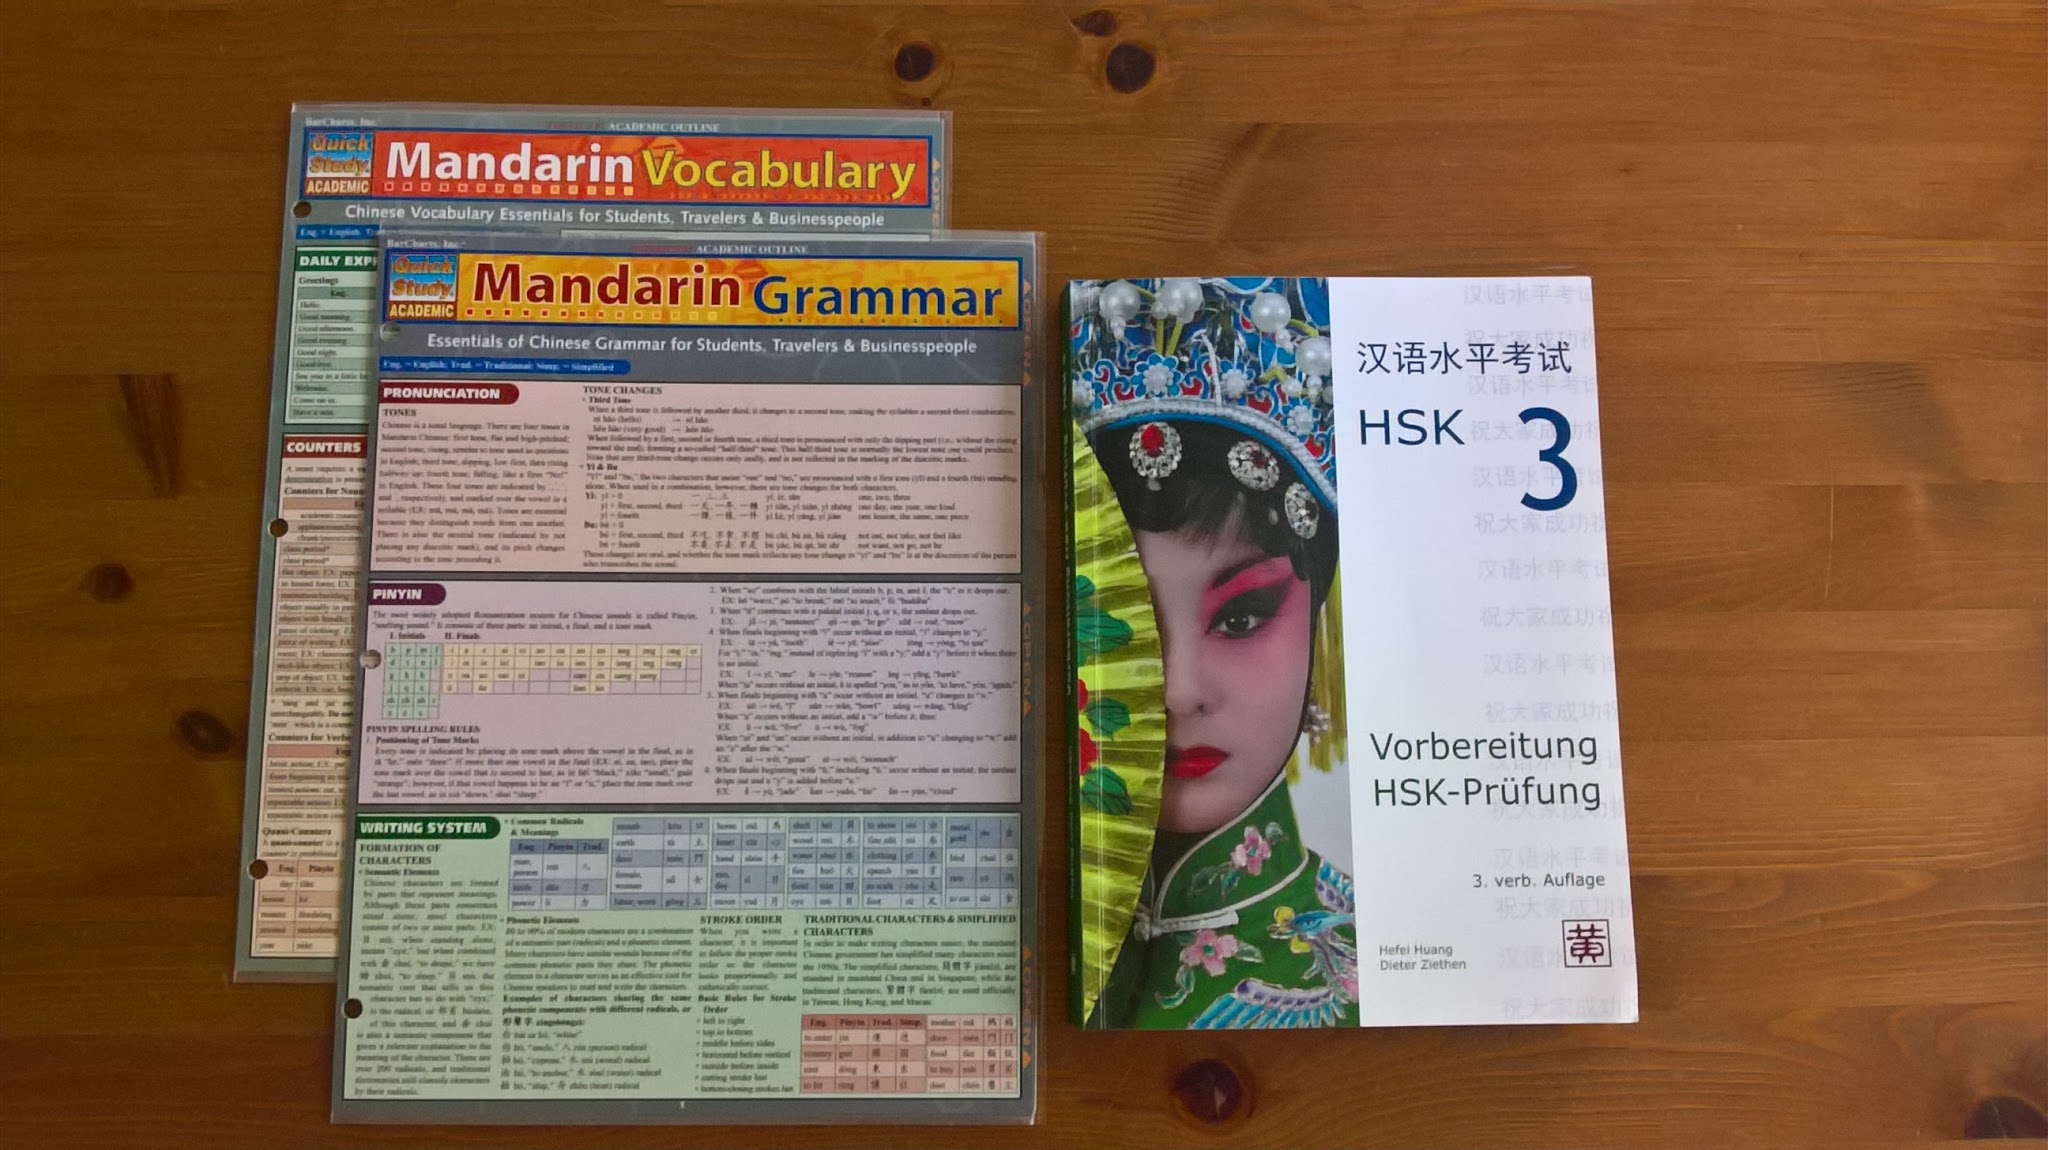 Learning tools for the HSK